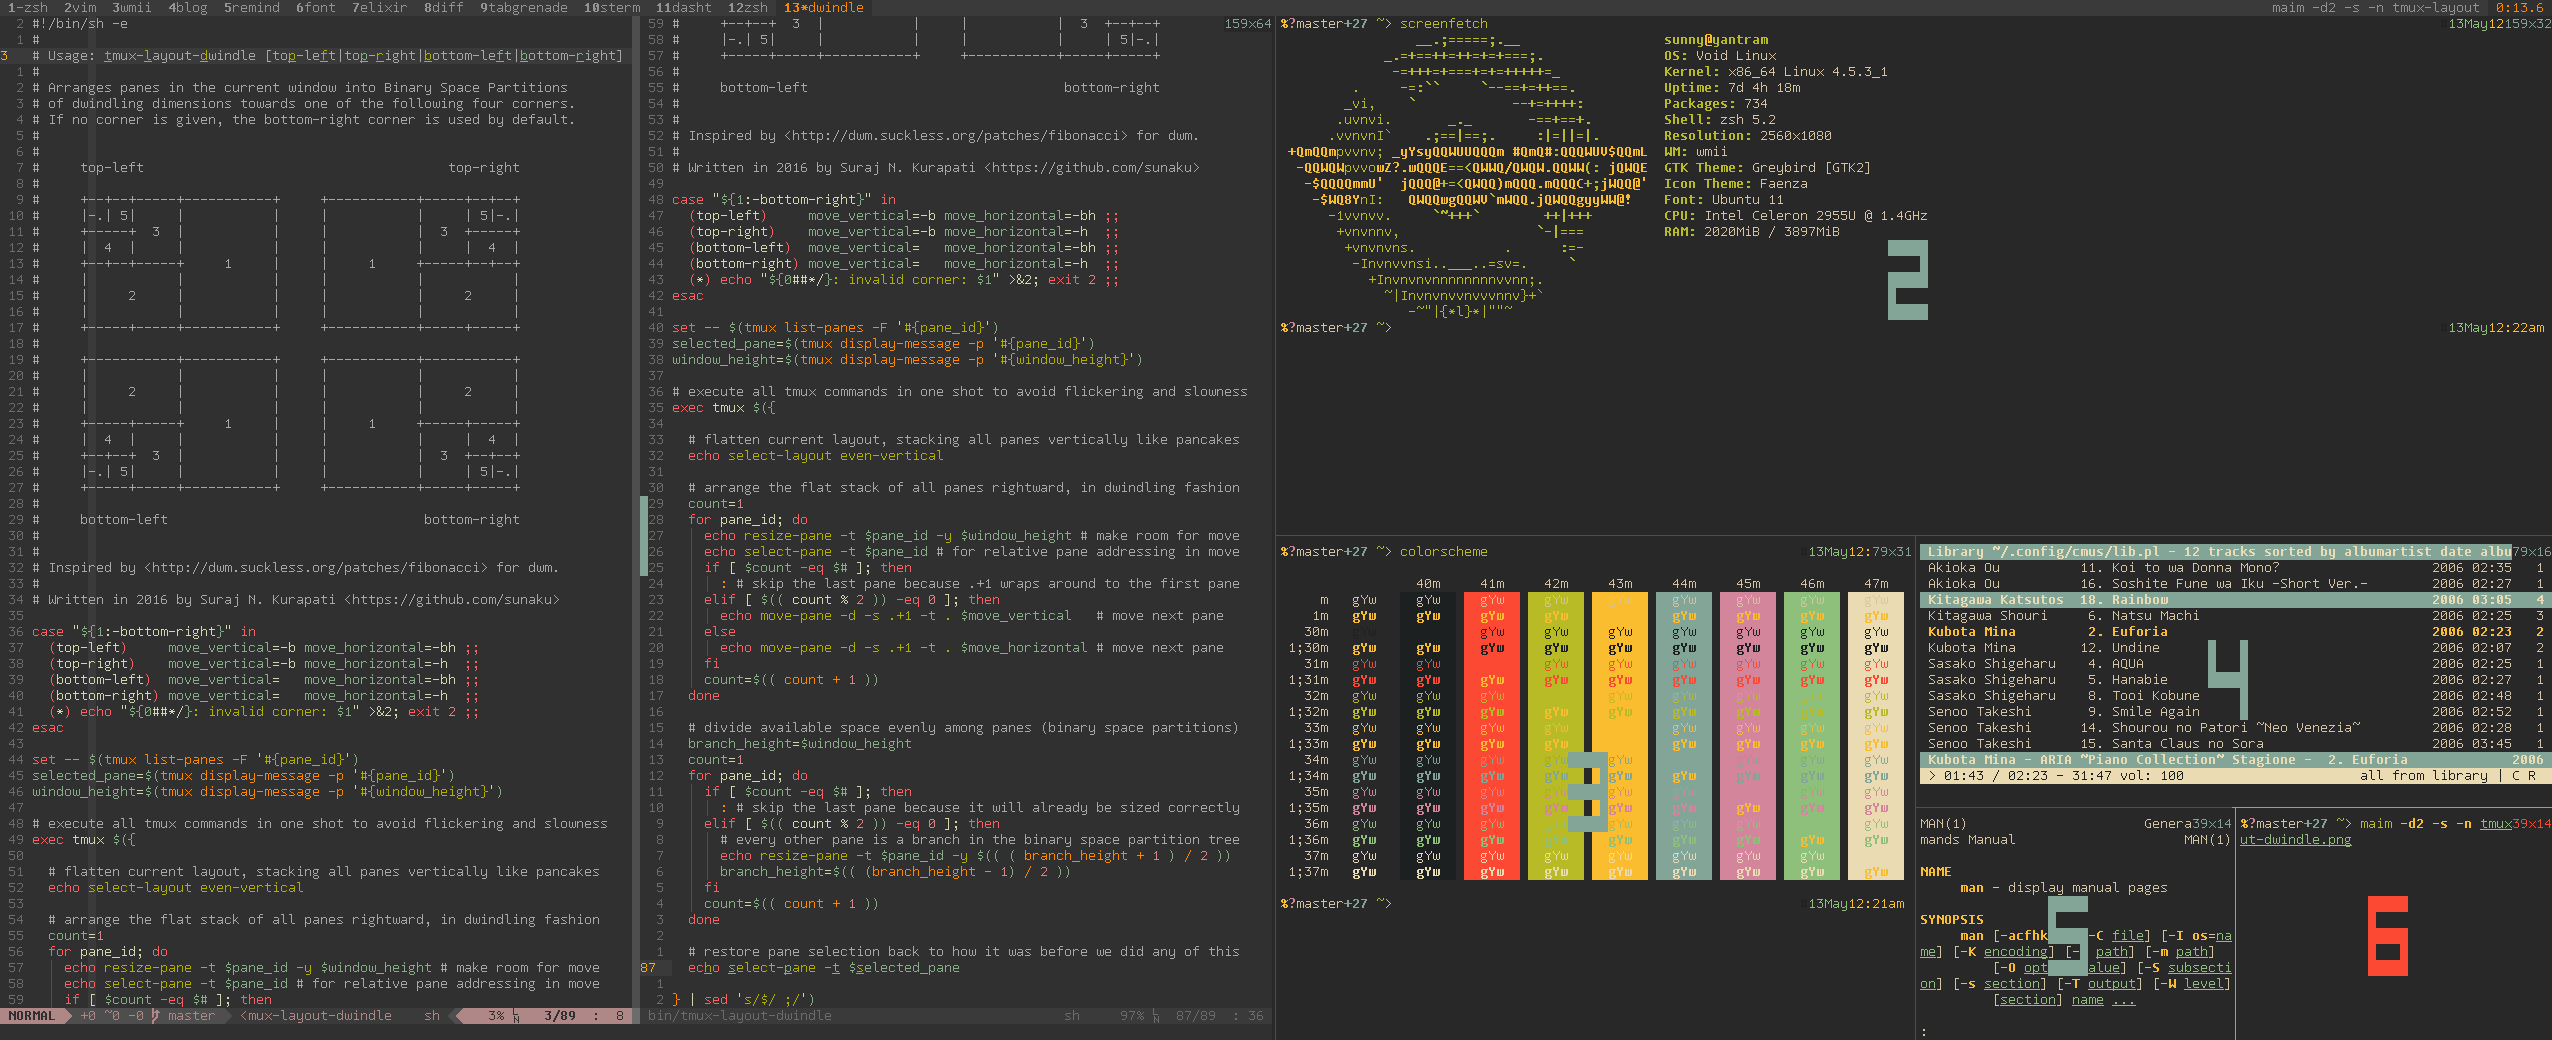 A sample result of running `tmux-layout-dwindle`.